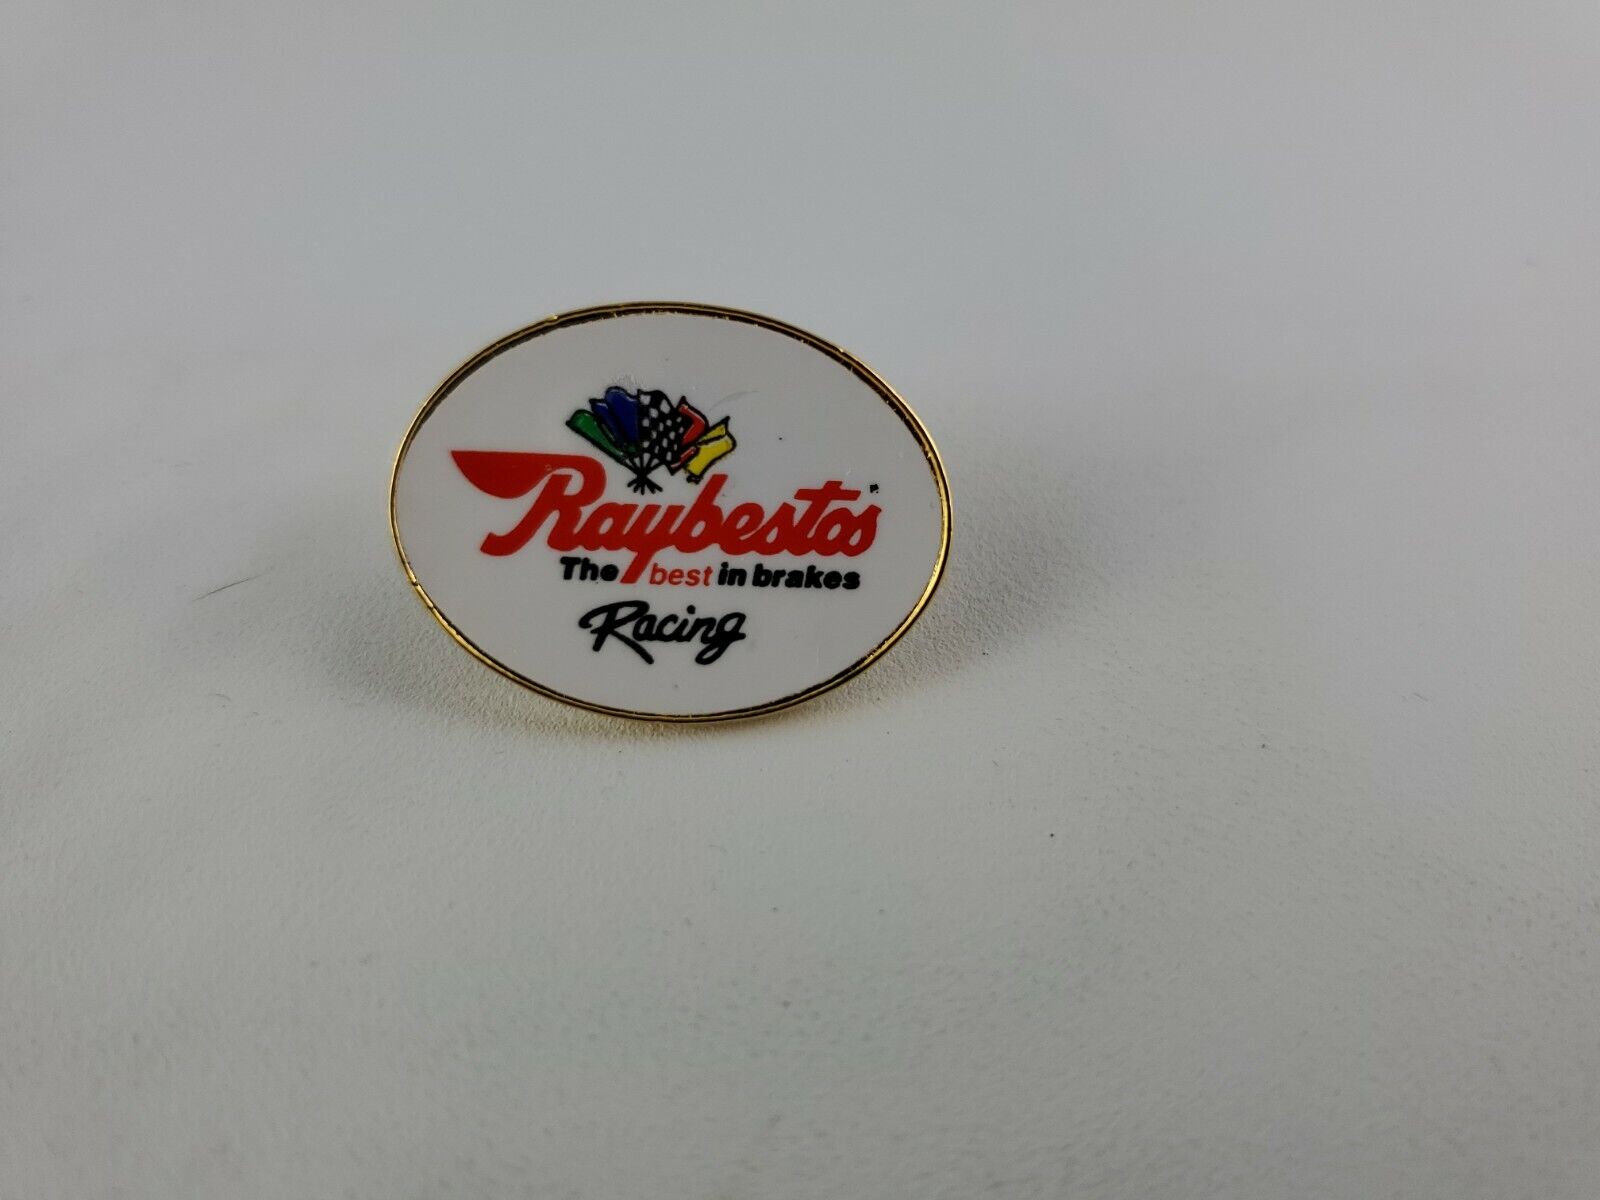 Raybestos The Best In Brakes Racing Pin Button Tie Tack Lapel Hat